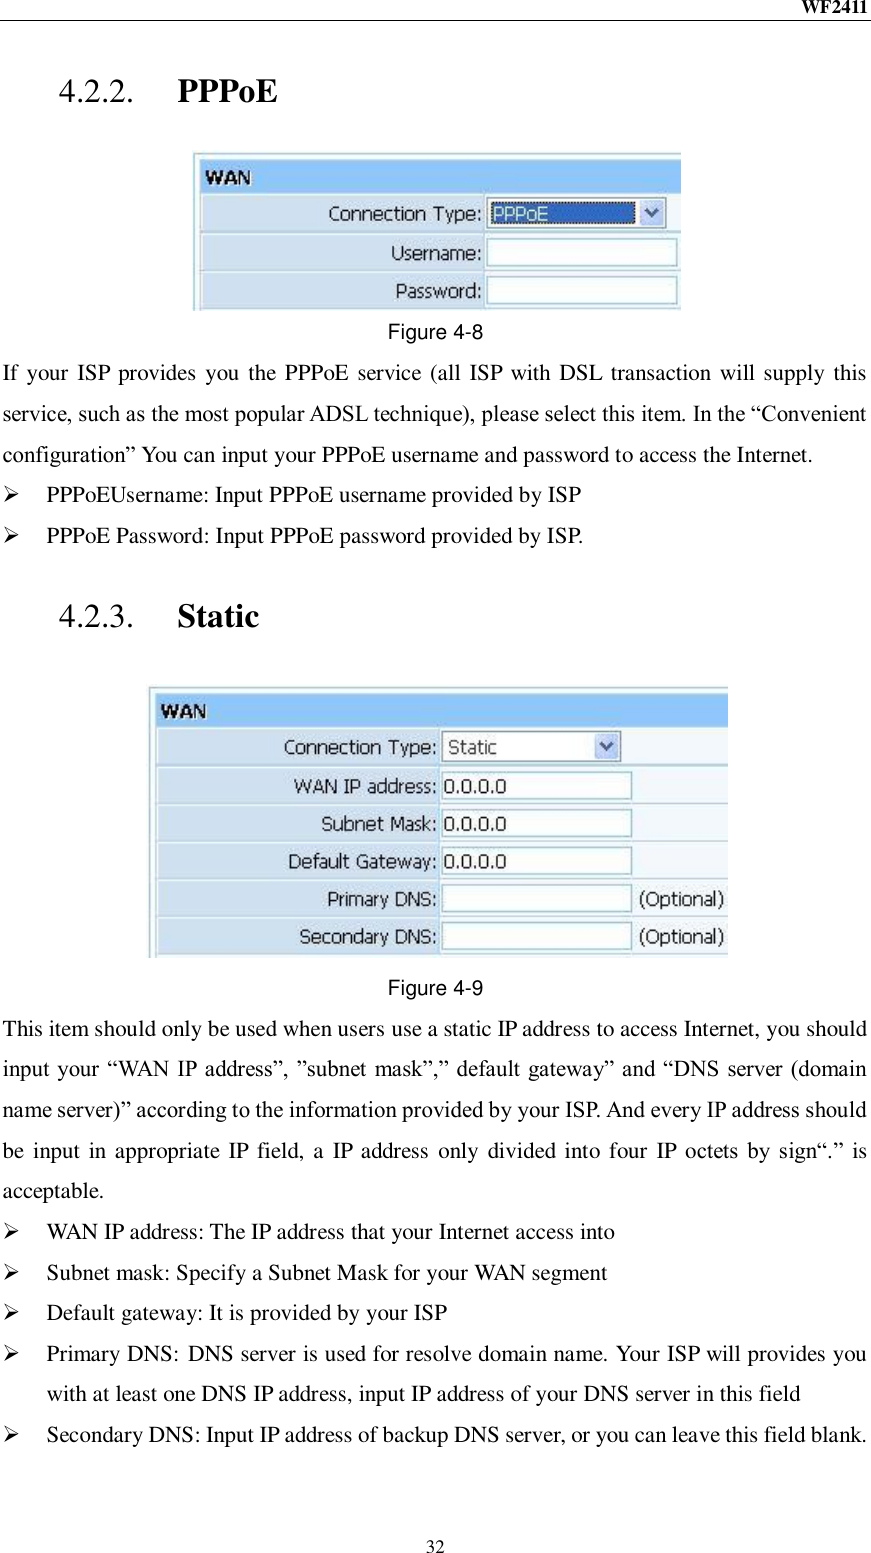 WF2411  32 4.2.2. PPPoE  Figure 4-8 If your  ISP provides you the PPPoE service (all ISP with DSL transaction will supply this service, such as the most popular ADSL technique), please select this item. In the “Convenient configuration” You can input your PPPoE username and password to access the Internet.  PPPoEUsername: Input PPPoE username provided by ISP  PPPoE Password: Input PPPoE password provided by ISP. 4.2.3. Static  Figure 4-9 This item should only be used when users use a static IP address to access Internet, you should input your “WAN IP address”, ”subnet mask”,” default gateway” and “DNS  server (domain name server)” according to the information provided by your ISP. And every IP address should be  input in appropriate IP field, a IP address only divided into four IP octets  by  sign“.” is acceptable.  WAN IP address: The IP address that your Internet access into  Subnet mask: Specify a Subnet Mask for your WAN segment  Default gateway: It is provided by your ISP  Primary DNS:  DNS server is used for resolve domain name. Your ISP will provides you with at least one DNS IP address, input IP address of your DNS server in this field  Secondary DNS: Input IP address of backup DNS server, or you can leave this field blank. 